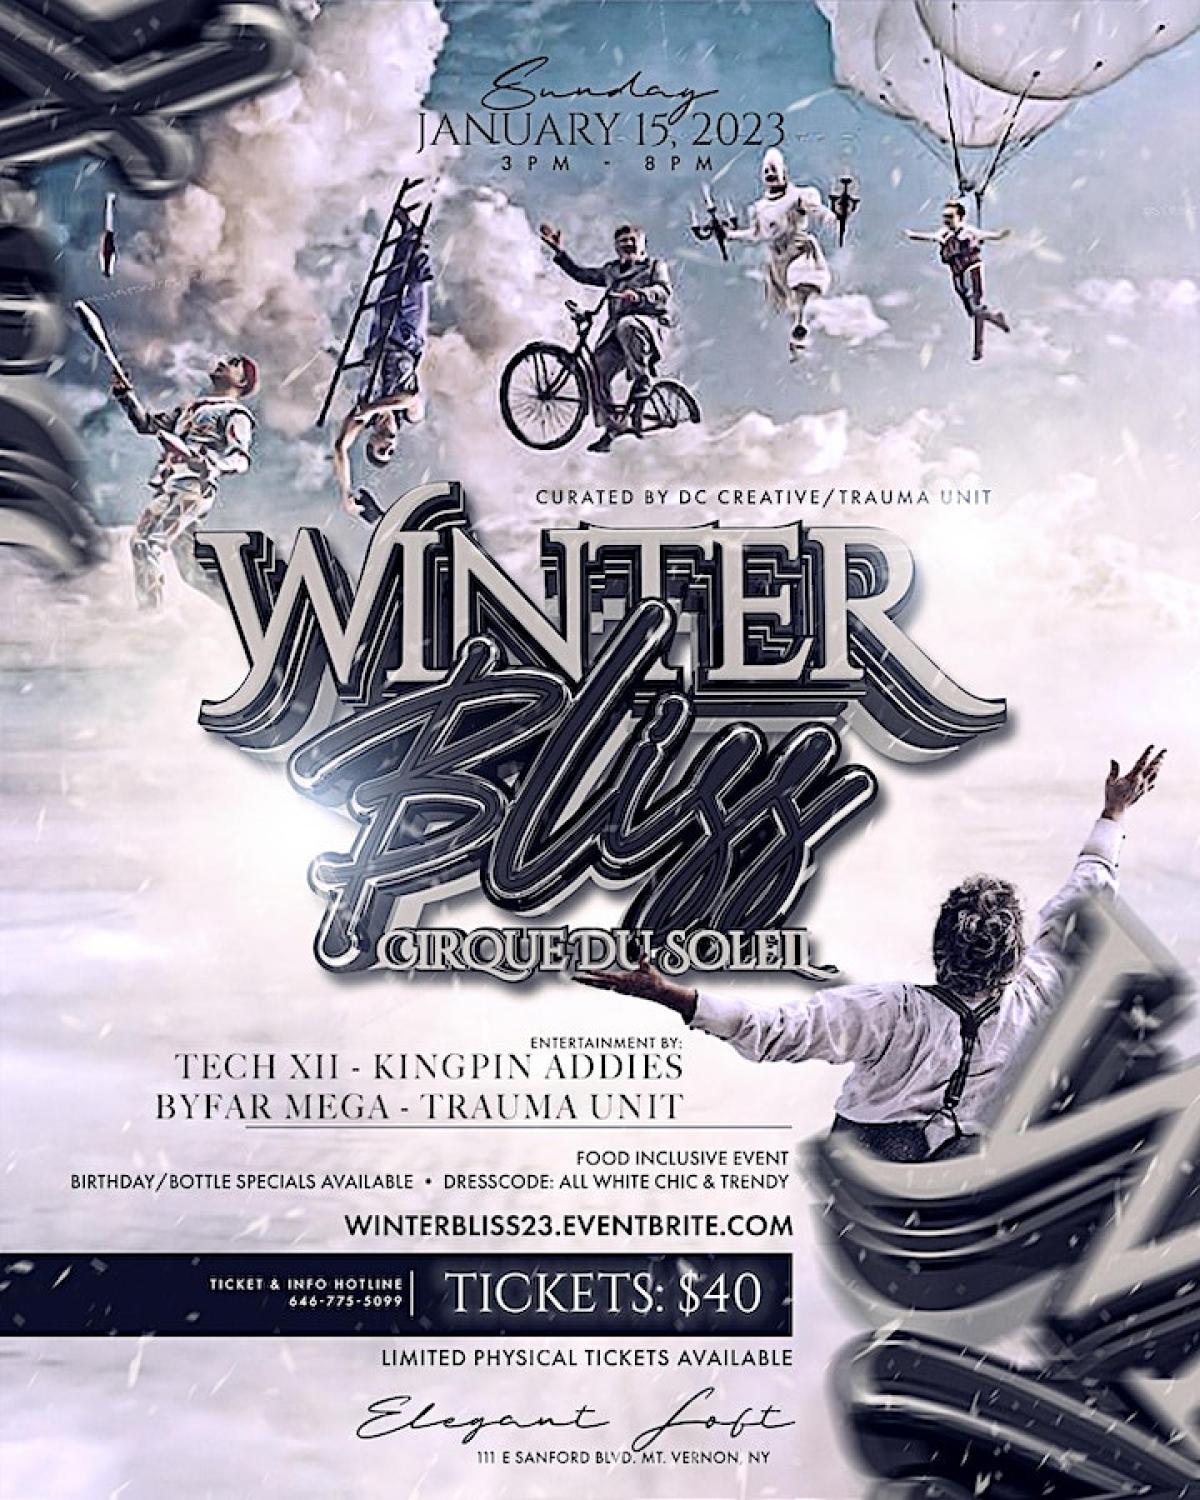 Winter Bliss flyer or graphic.